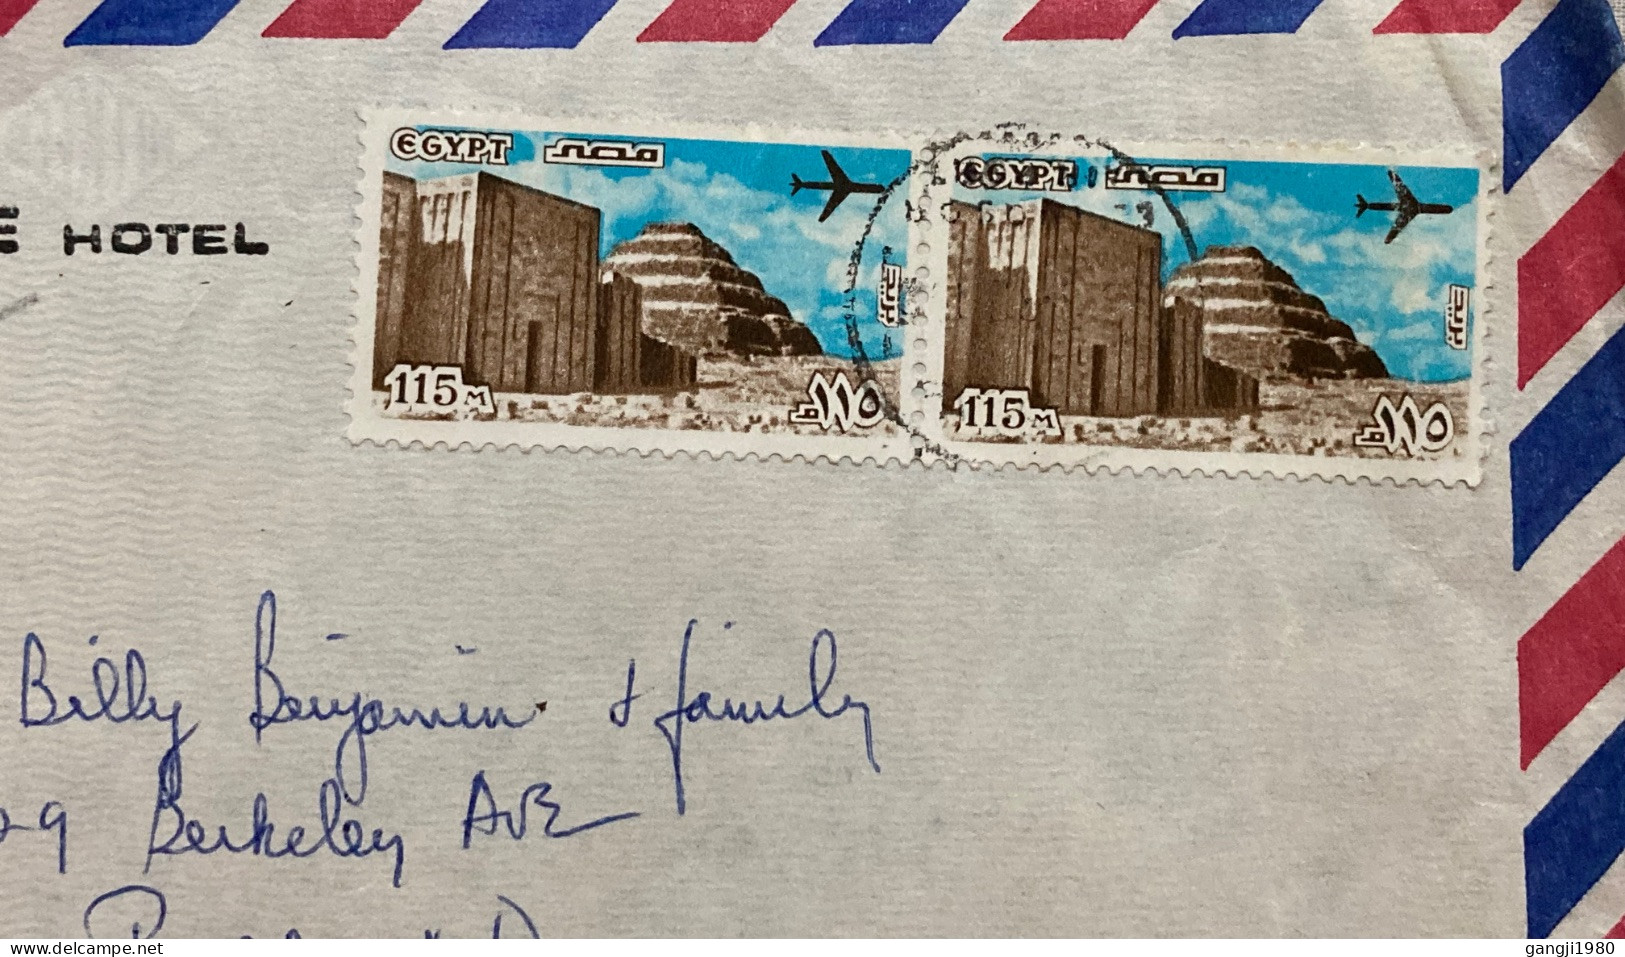 EGYPT 1980, COVER USED TO USA, NEW WINTER PALACE HOTEL, LUXOR, 2 STAMP, PYRAMID, AEROPLANE, ARCHELOGY, BUILDING, HERITAG - Storia Postale